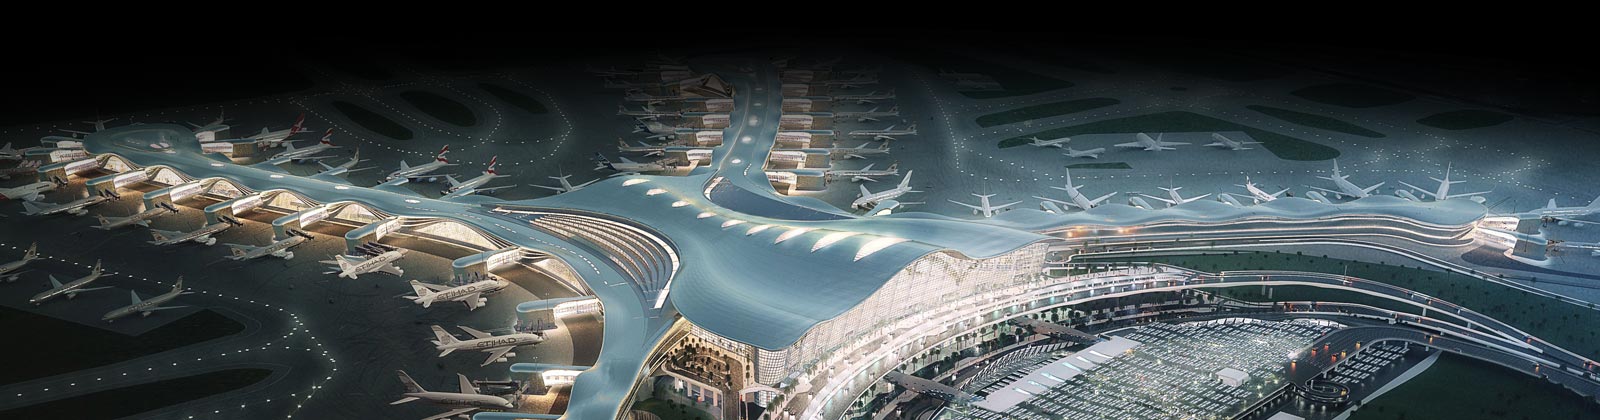 To be the world’s leading airports group